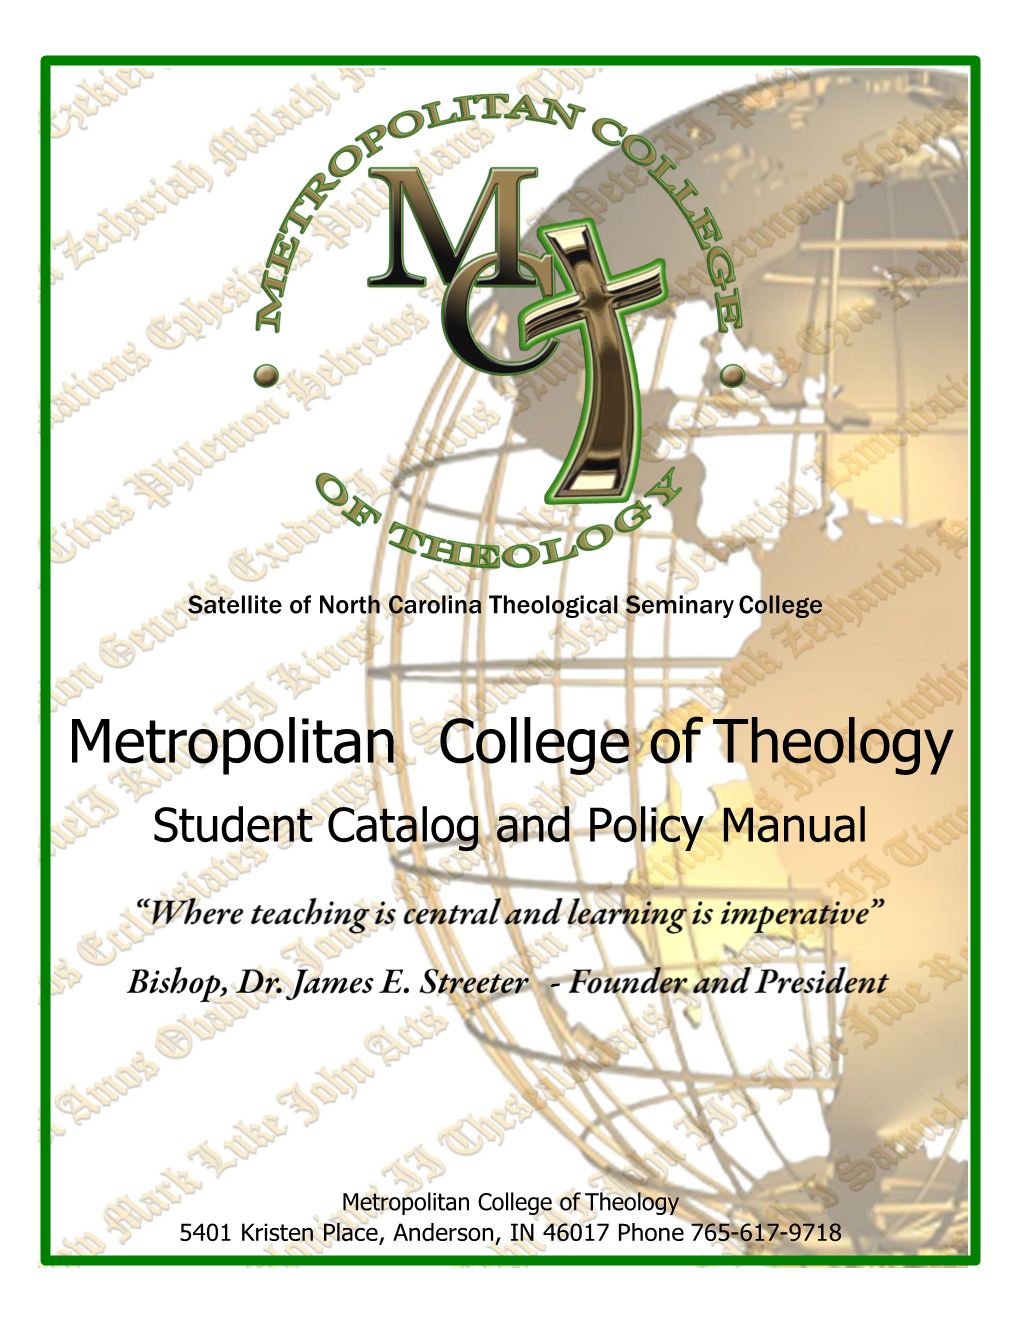 Metropolitan College of Theology Student Catalog and Policy Manual